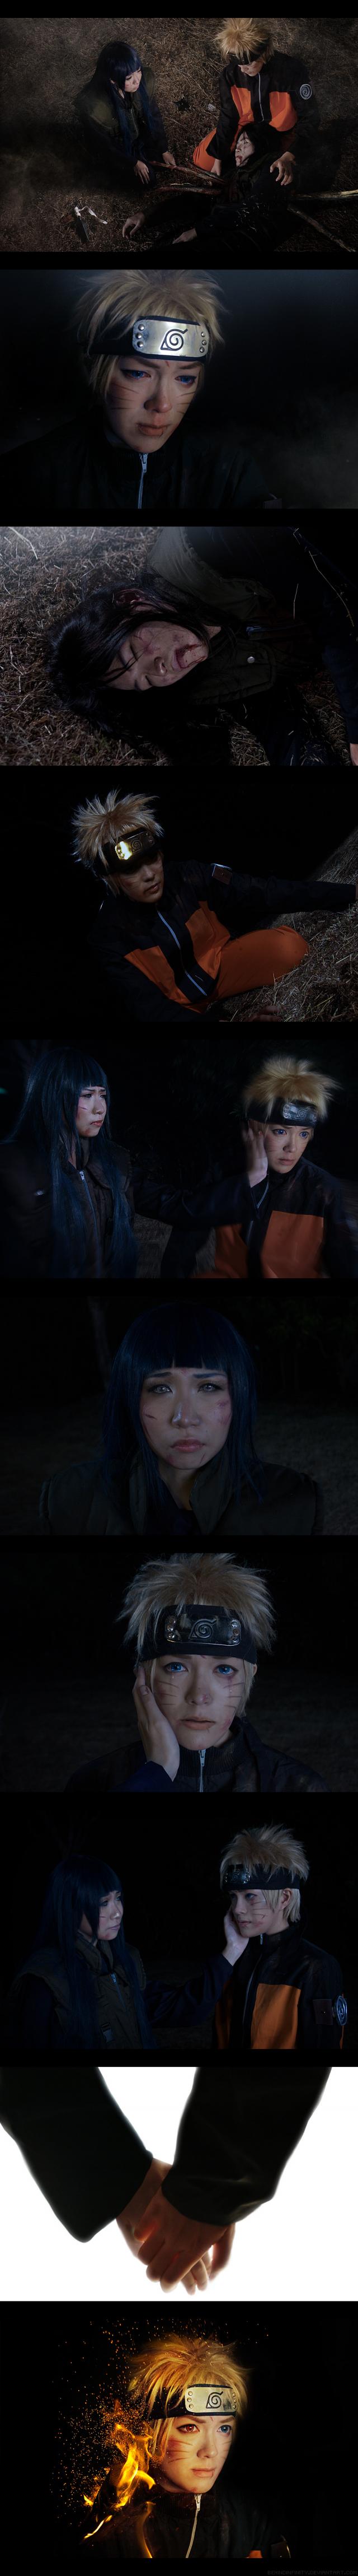 Naruto chapter 615 live action